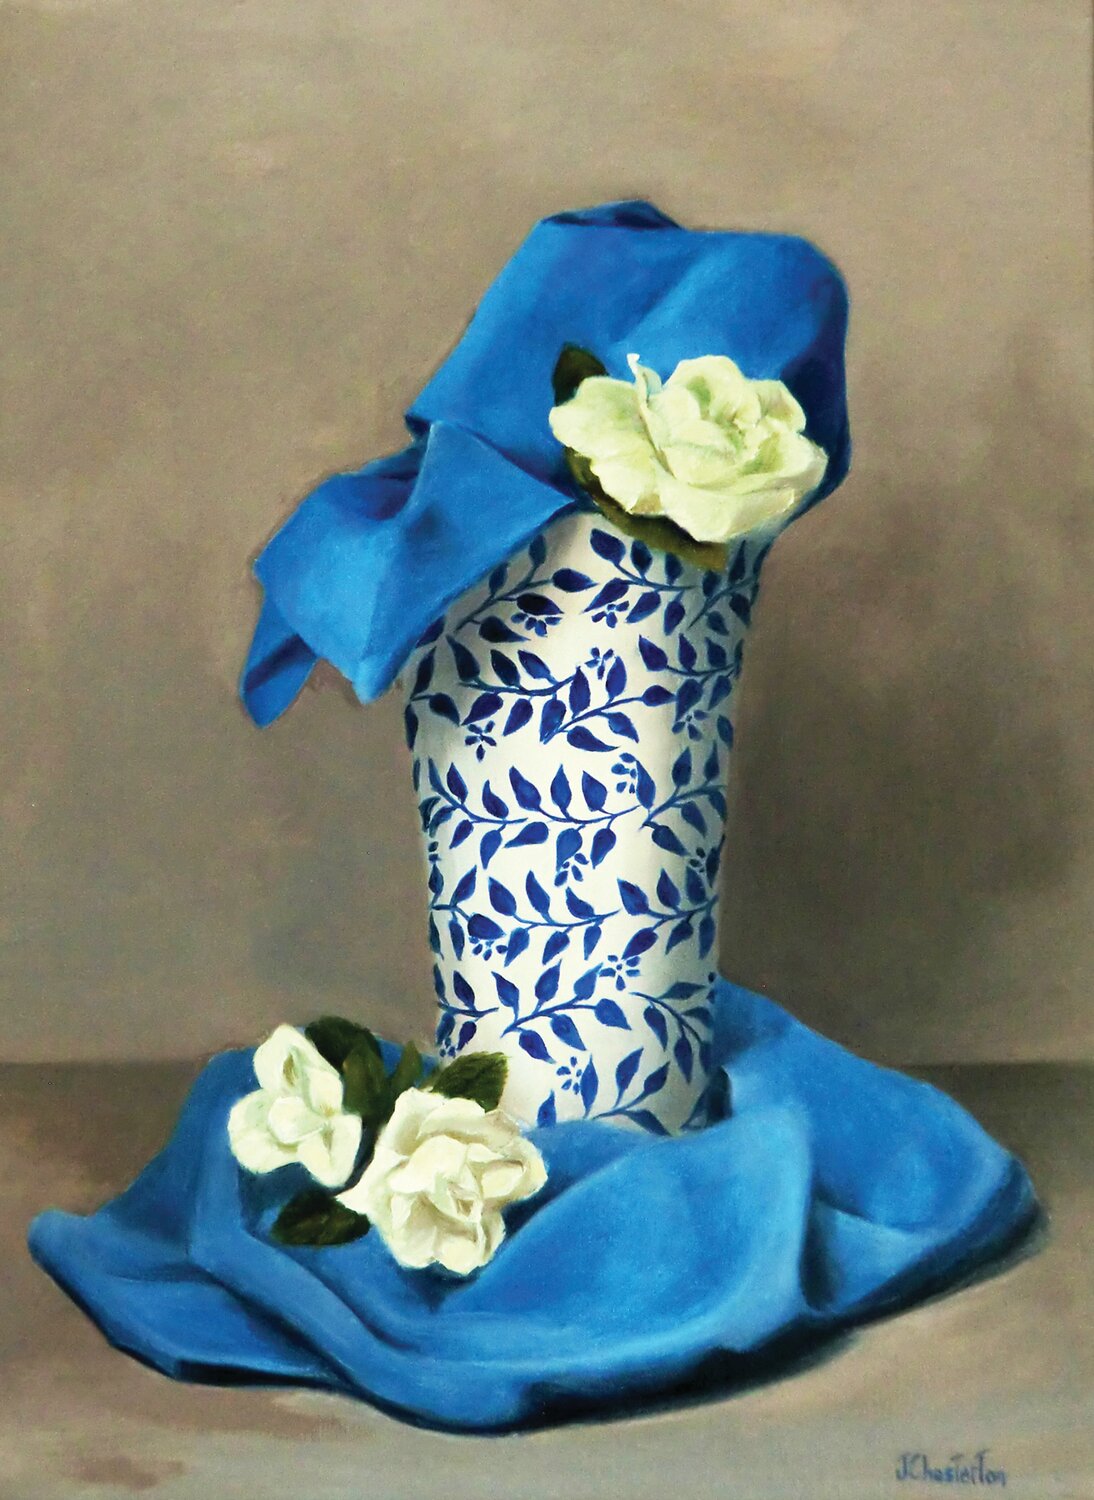 “Cobalt and White Roses” is by Jeanne Chesterton.